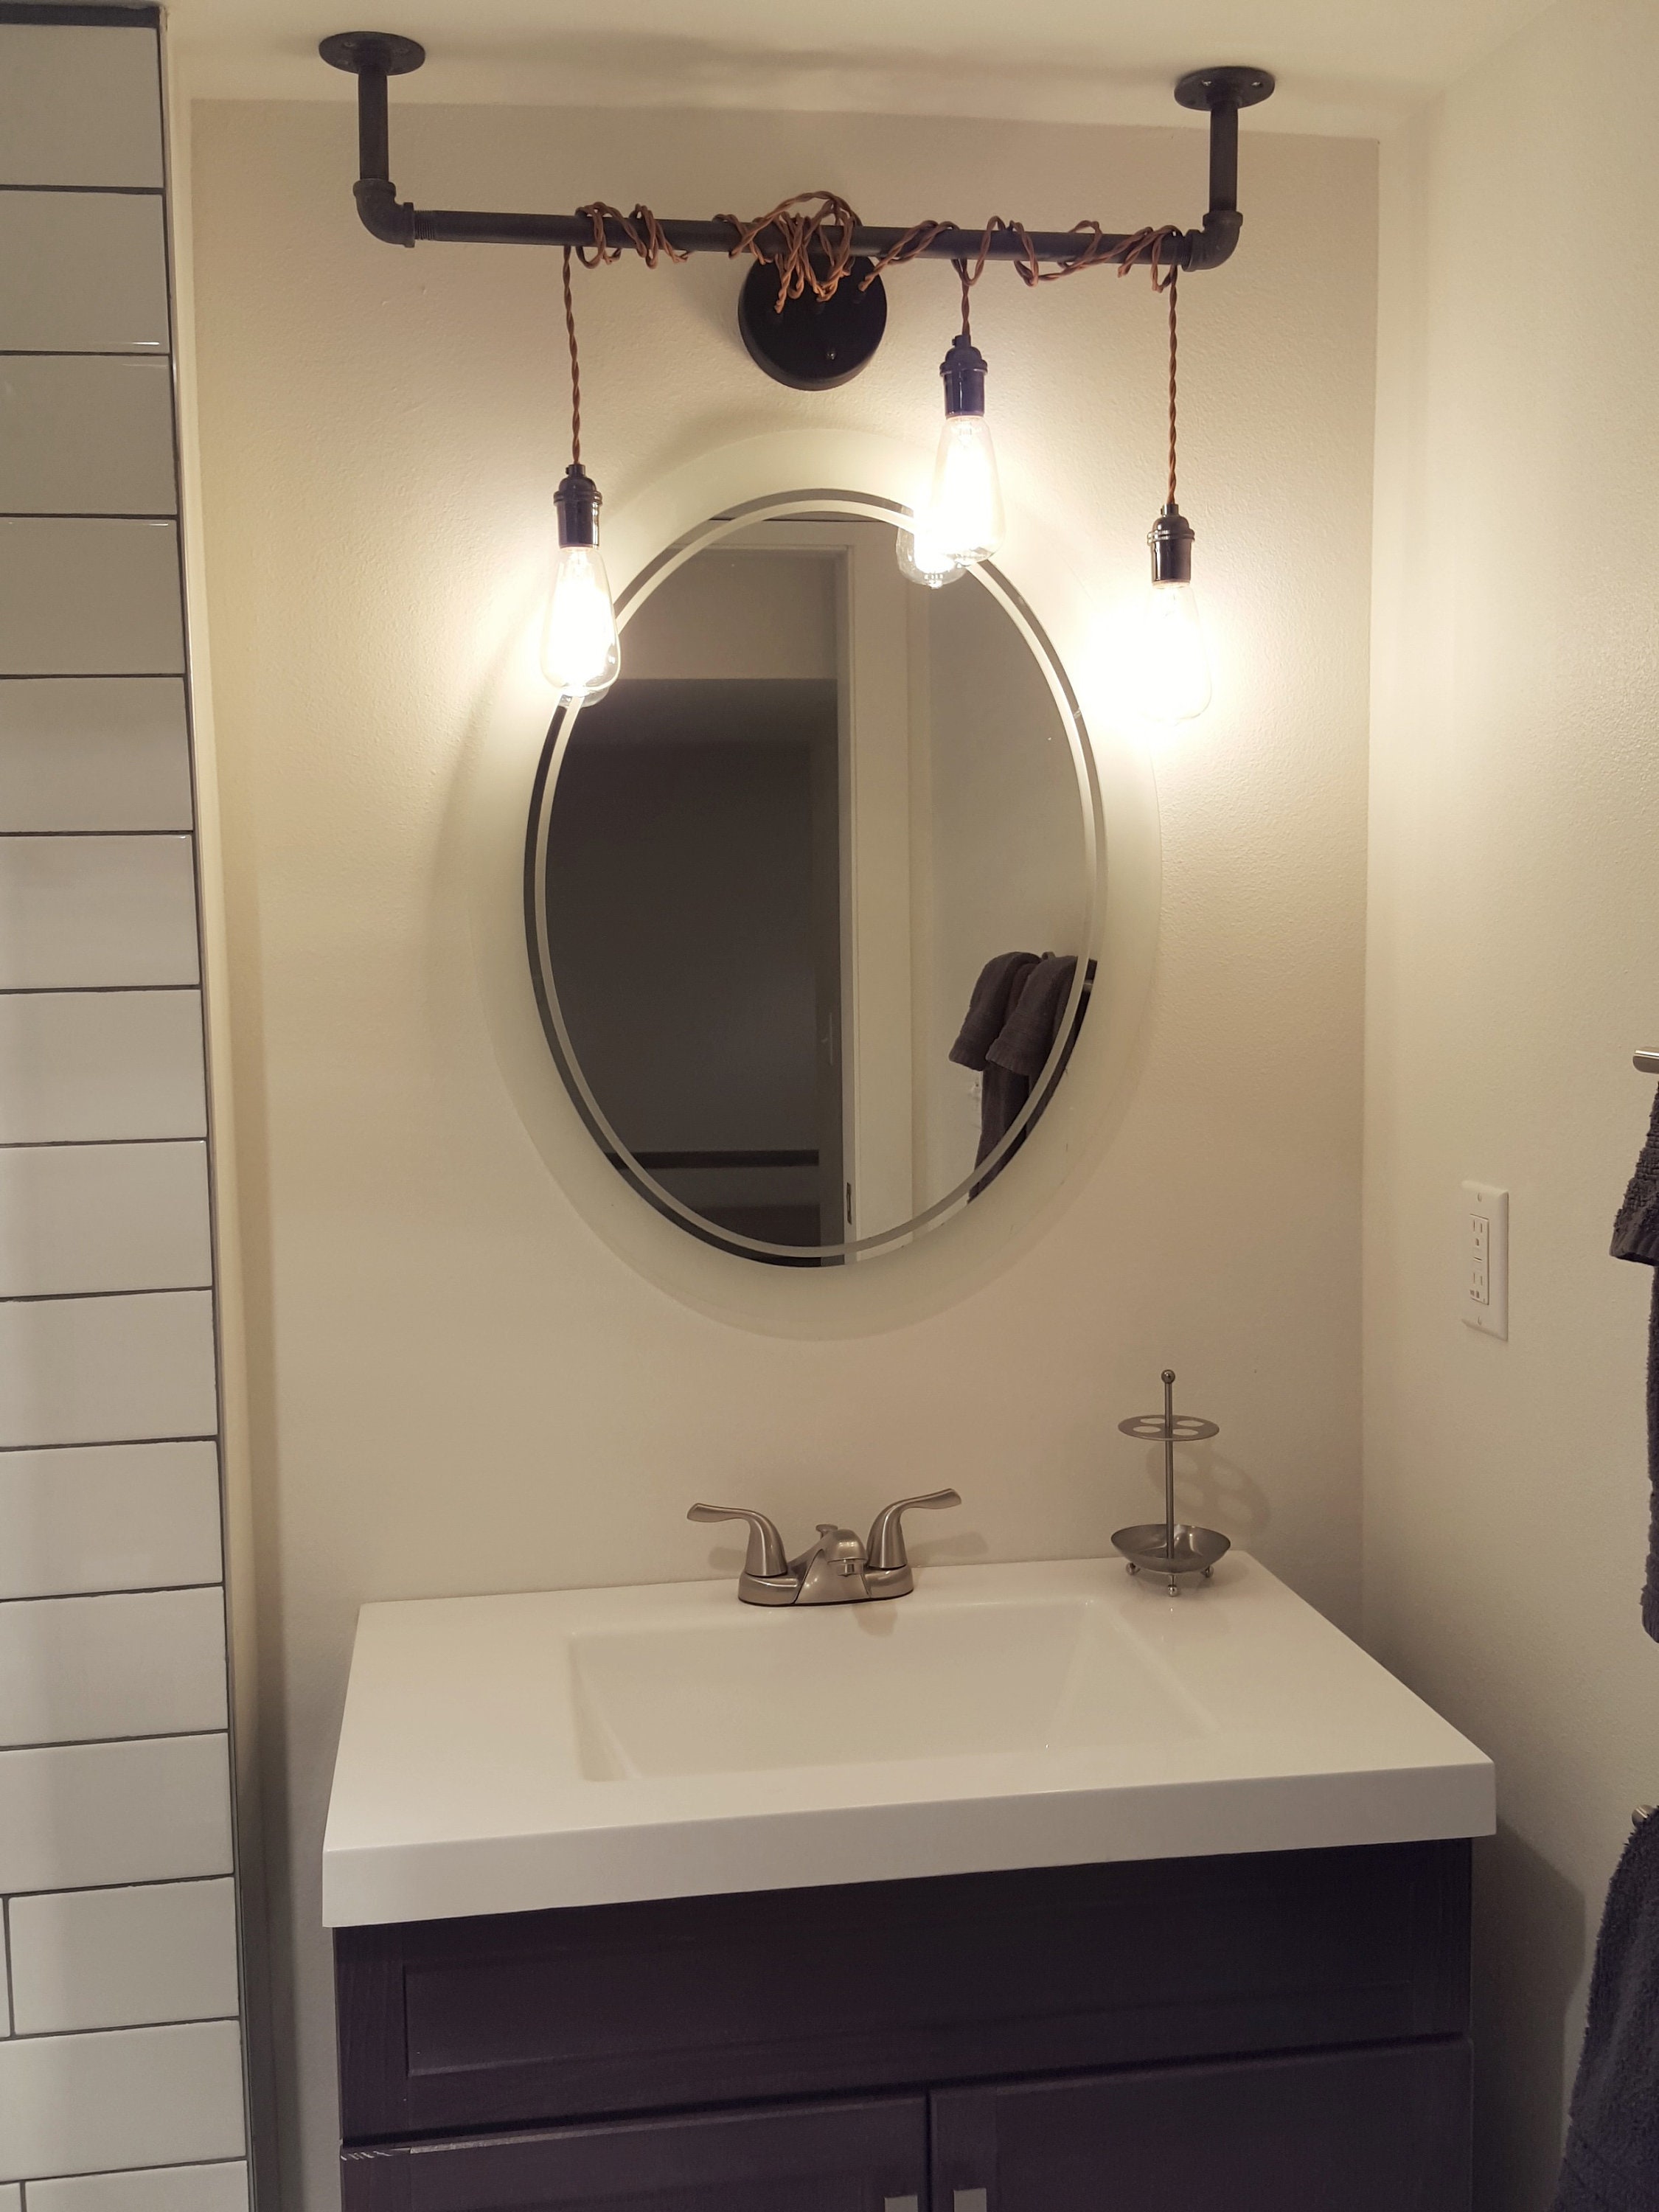 Simple Pendant Lighting For Bathroom Vanity for Large Space